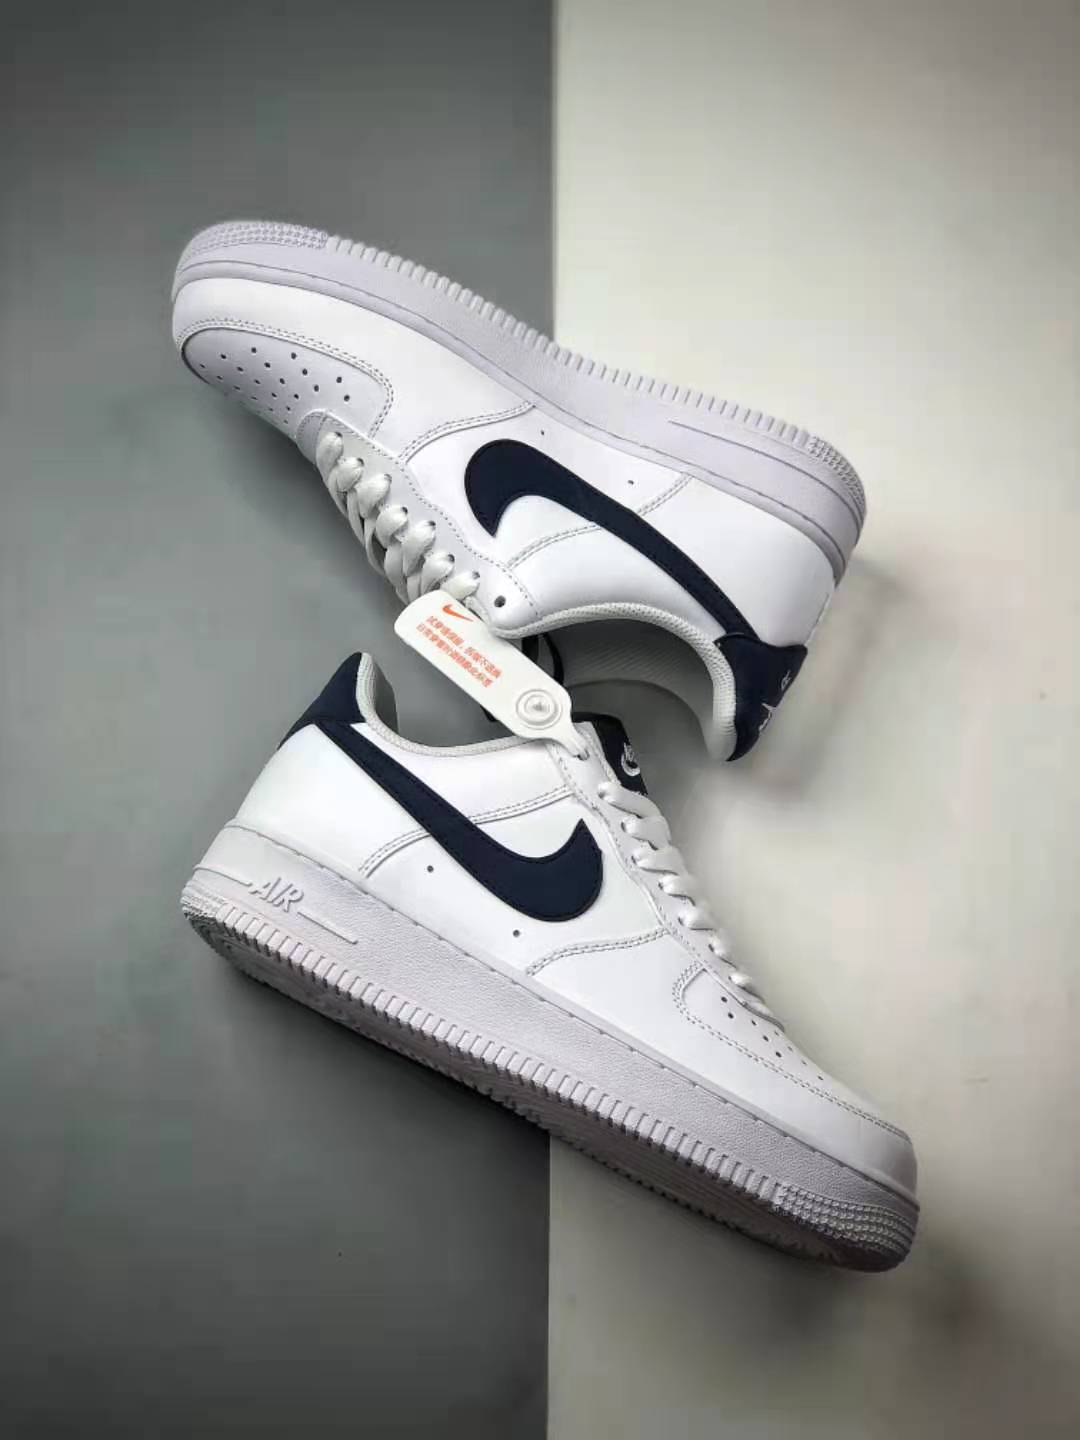 Nike Air Force 1 '07 'Midnight Navy' CJ1607-100 | Stylish and sleek sneakers